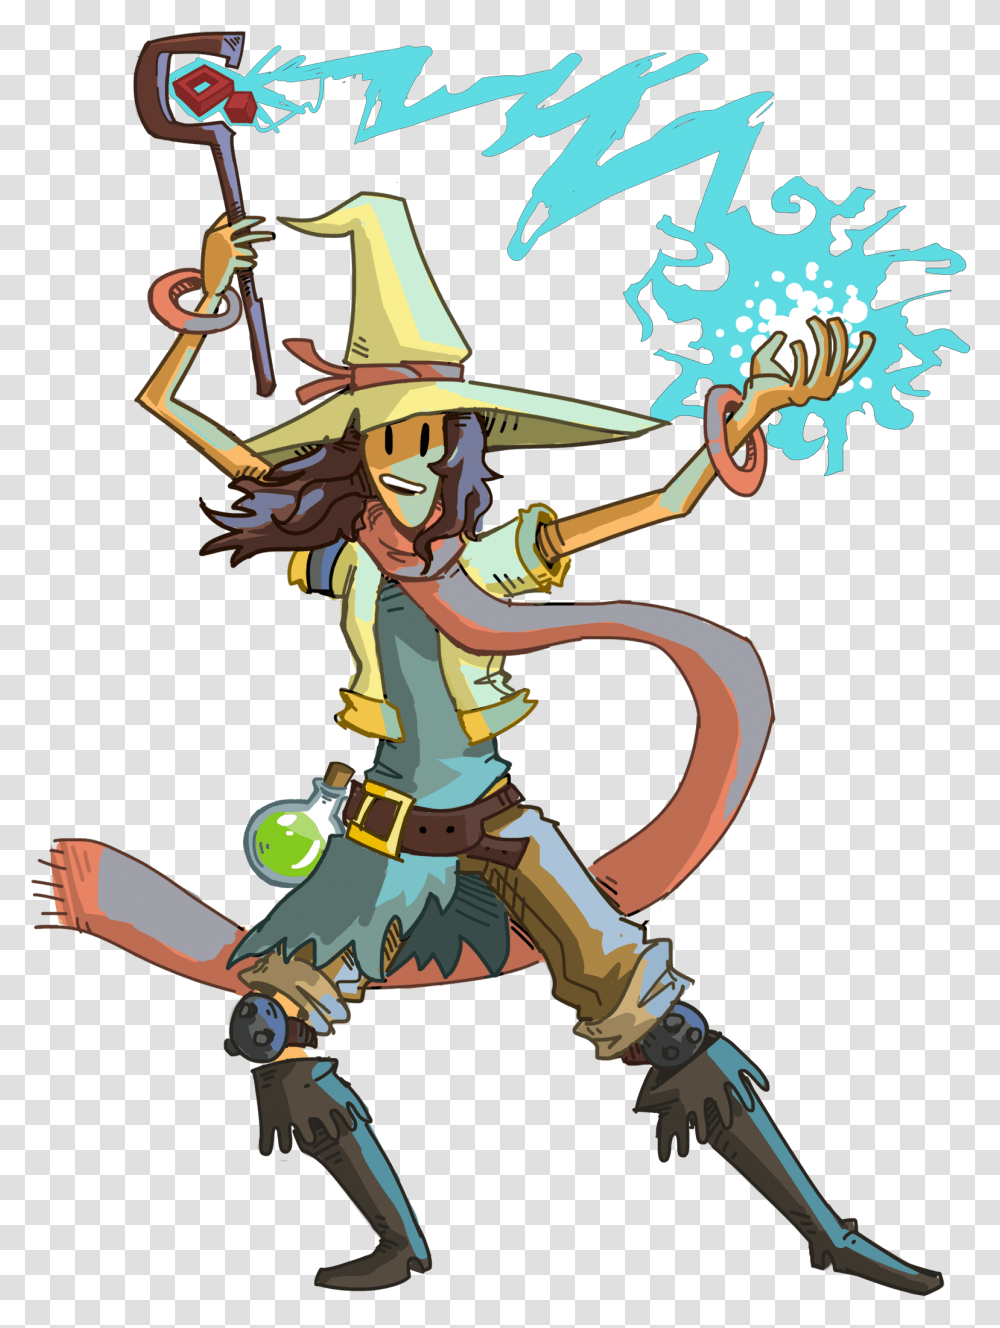 Wynncraft Mage Image Wynncraft Mage, Person, Duel, Samurai, Doodle Transparent Png